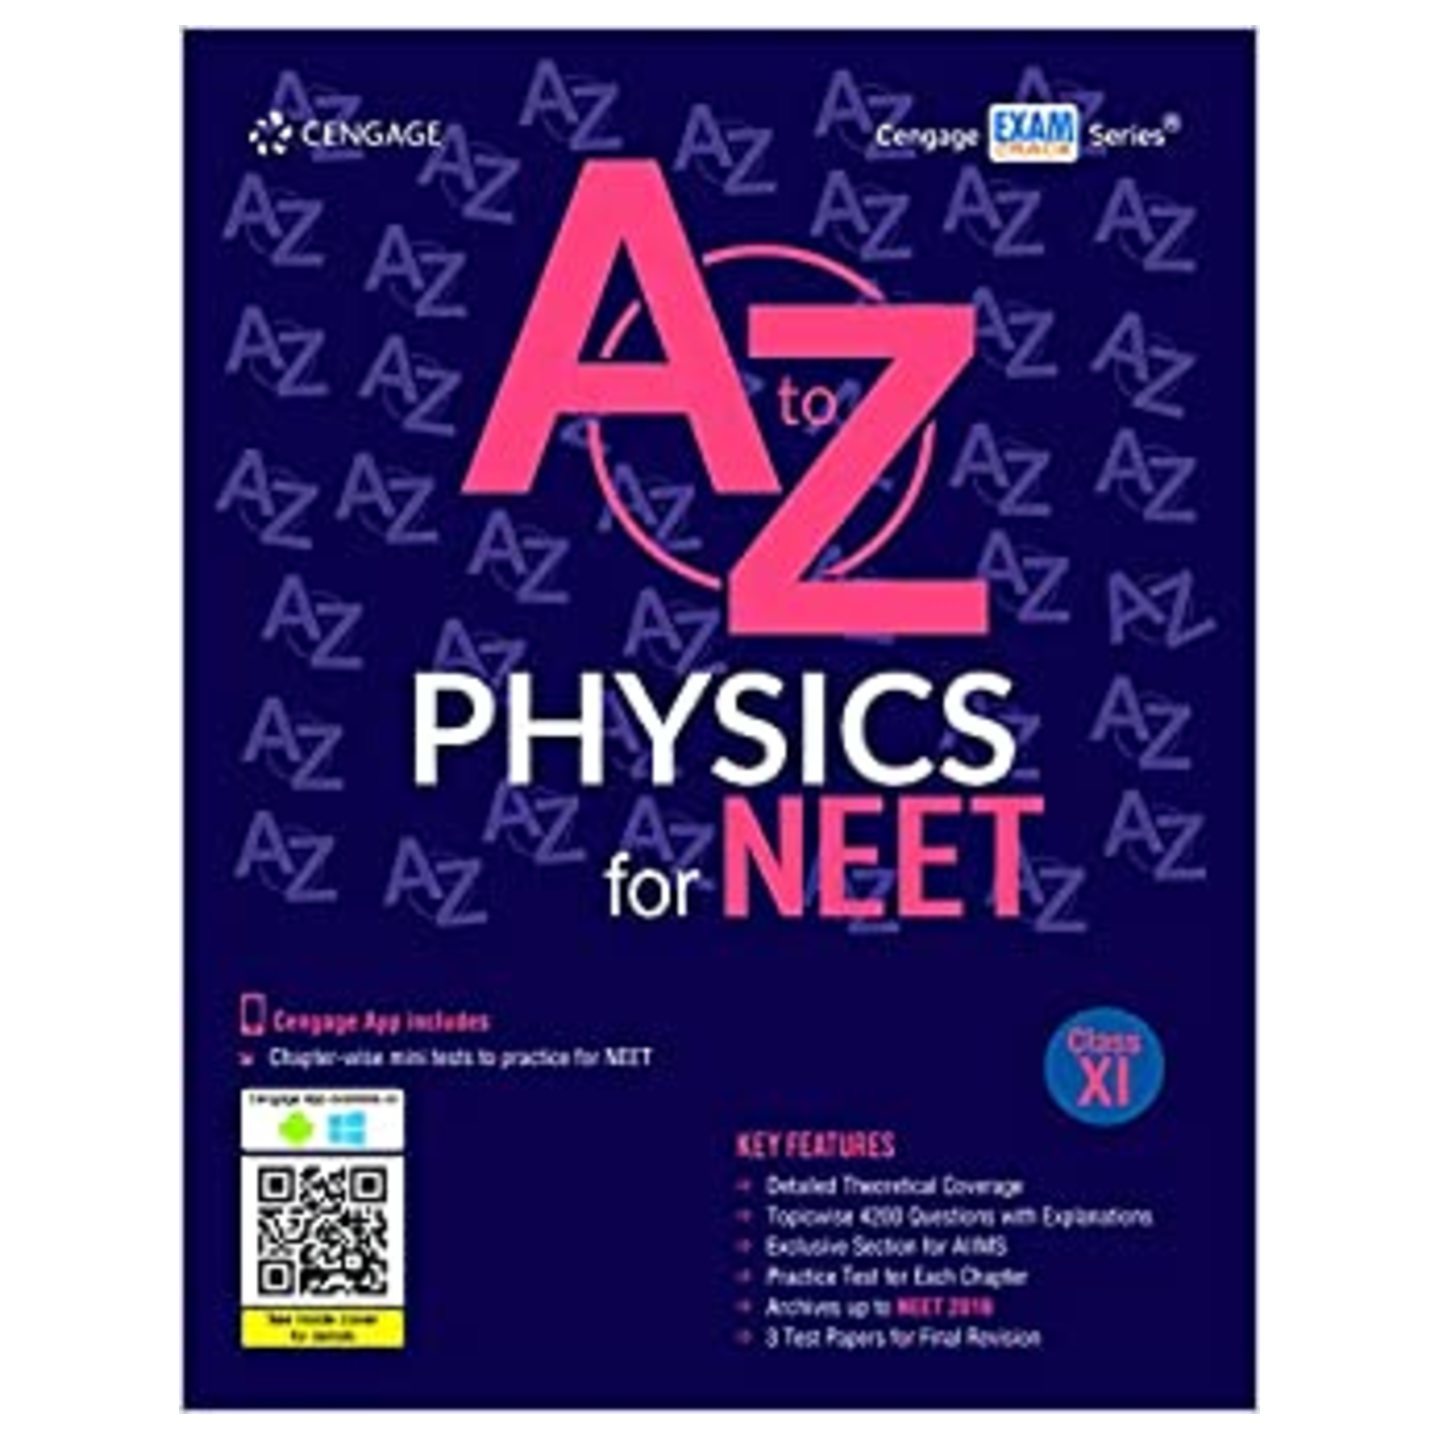 CENGAGE A to Z Physics for NEET Class XI